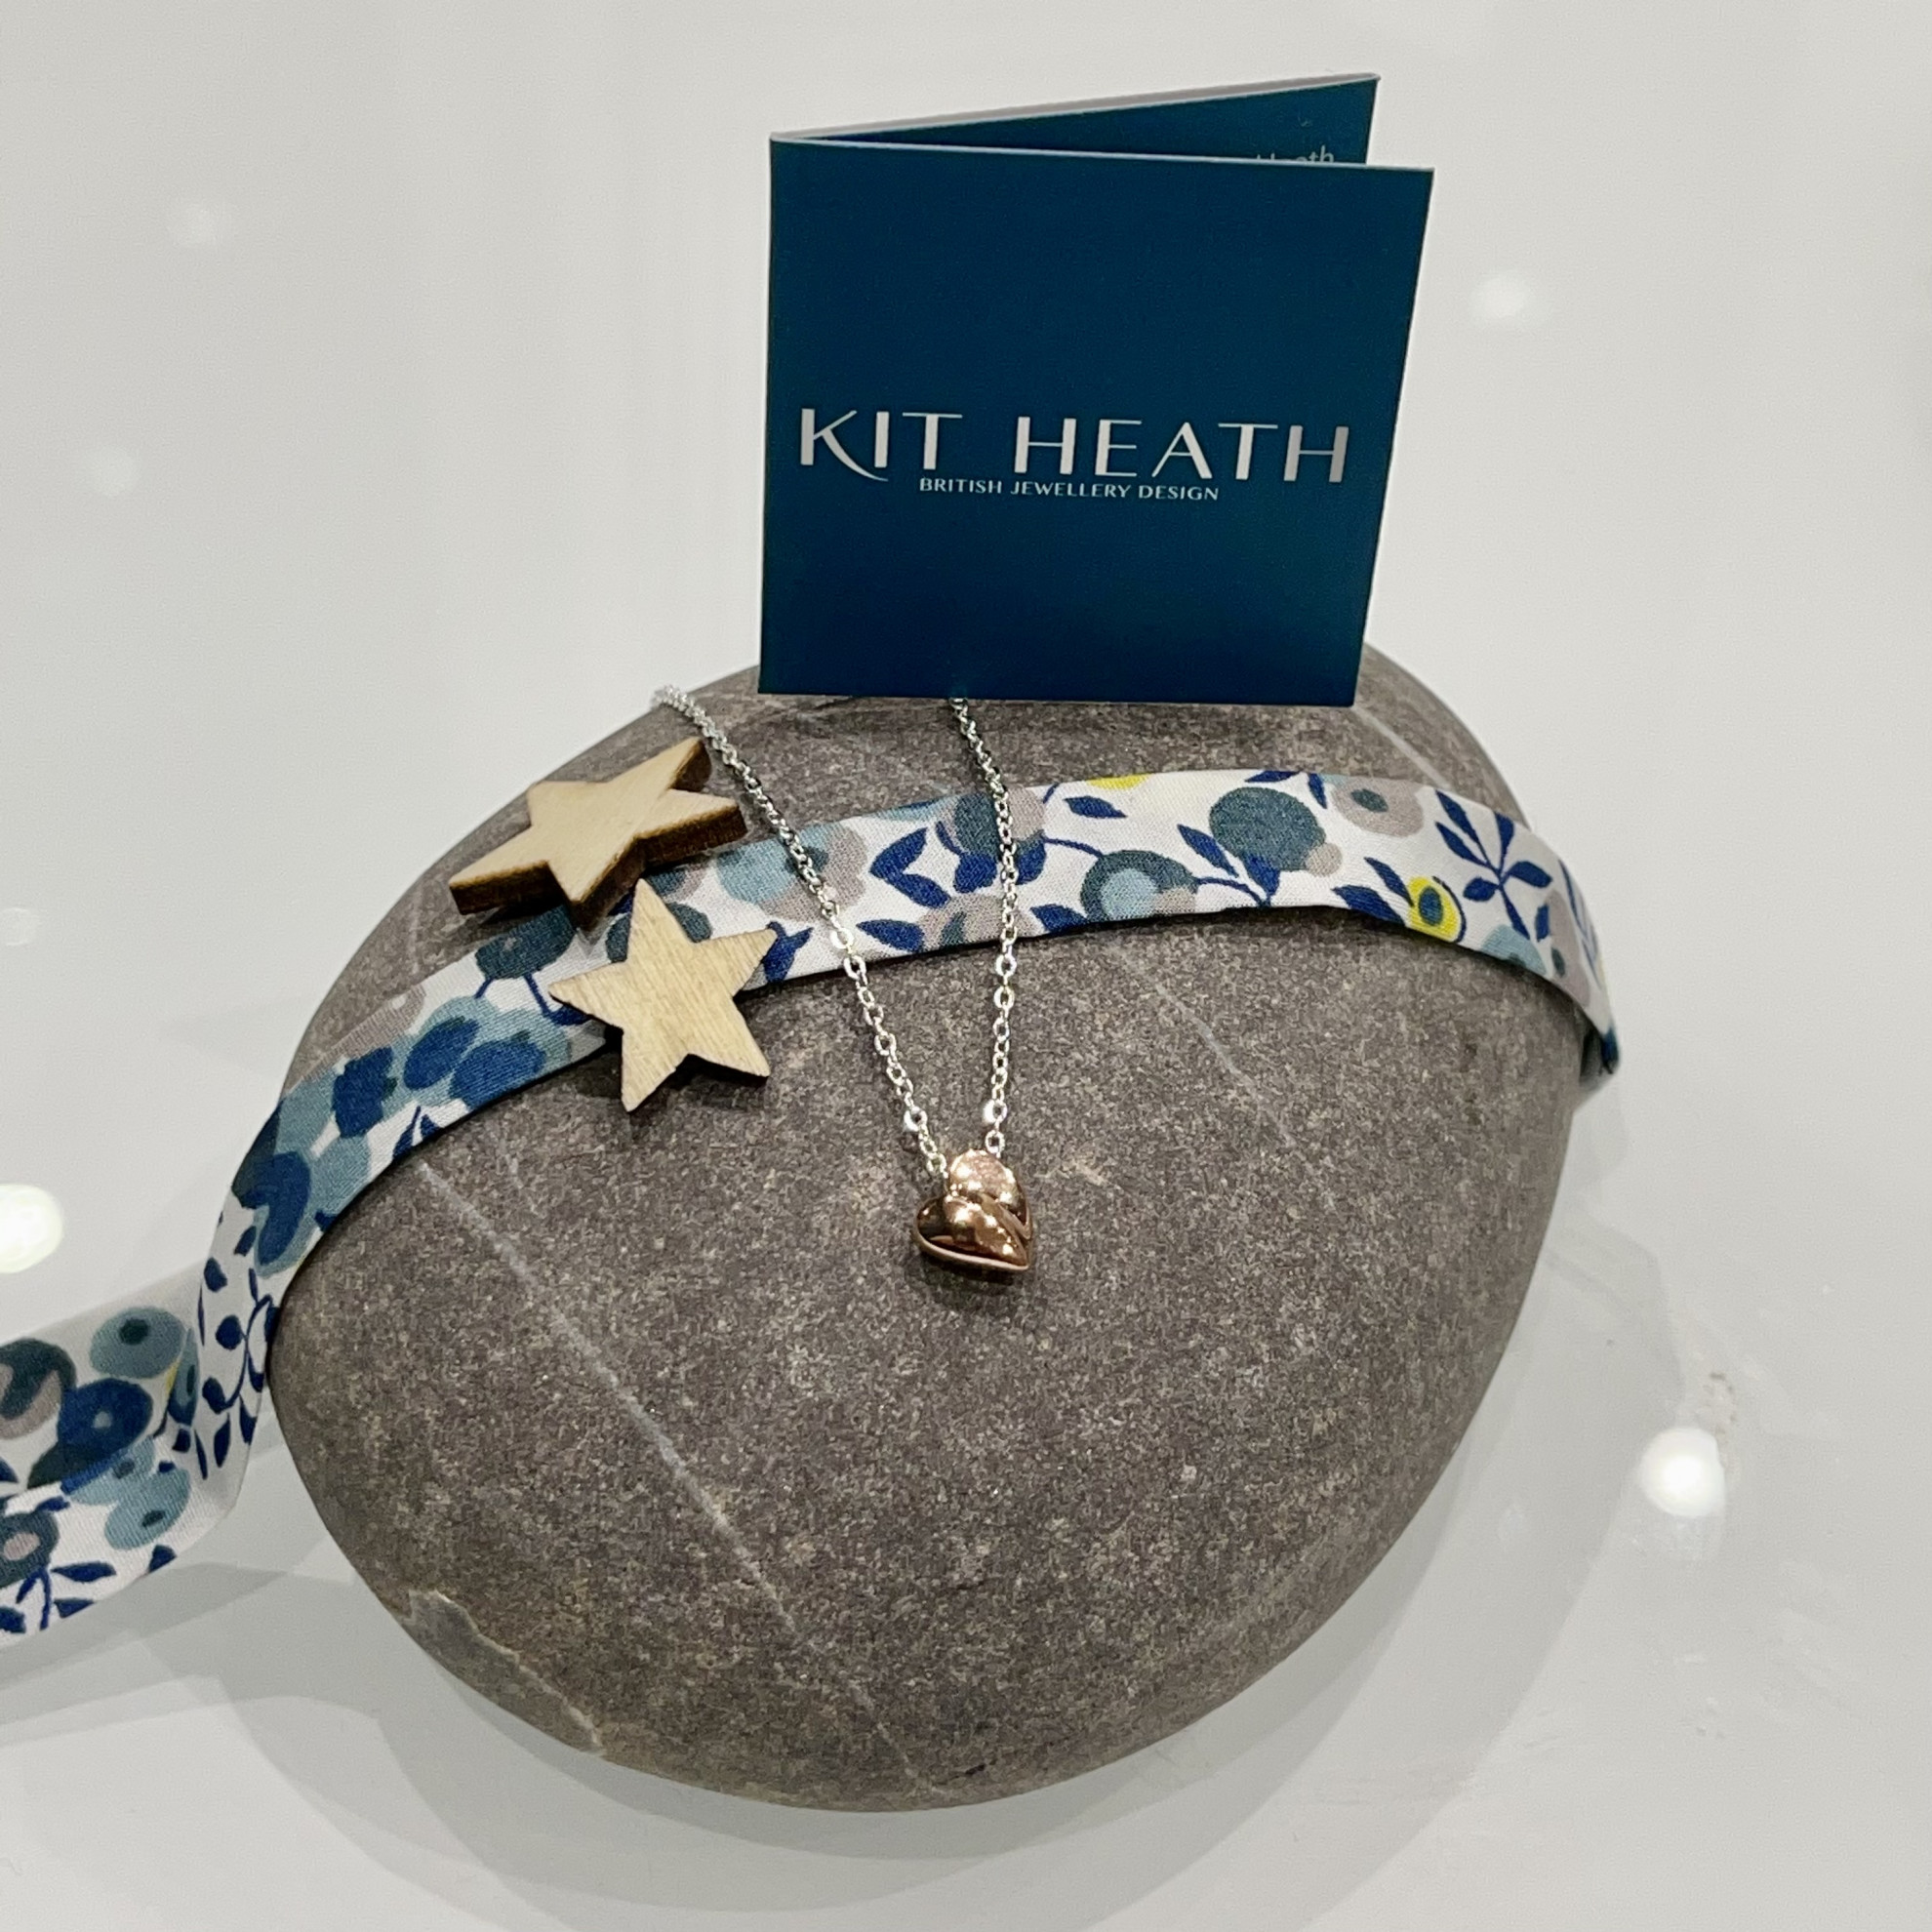 Kit Heath Miniature Sweet Heart Necklace Sterling Silver & 18ct Rose Gold Plate